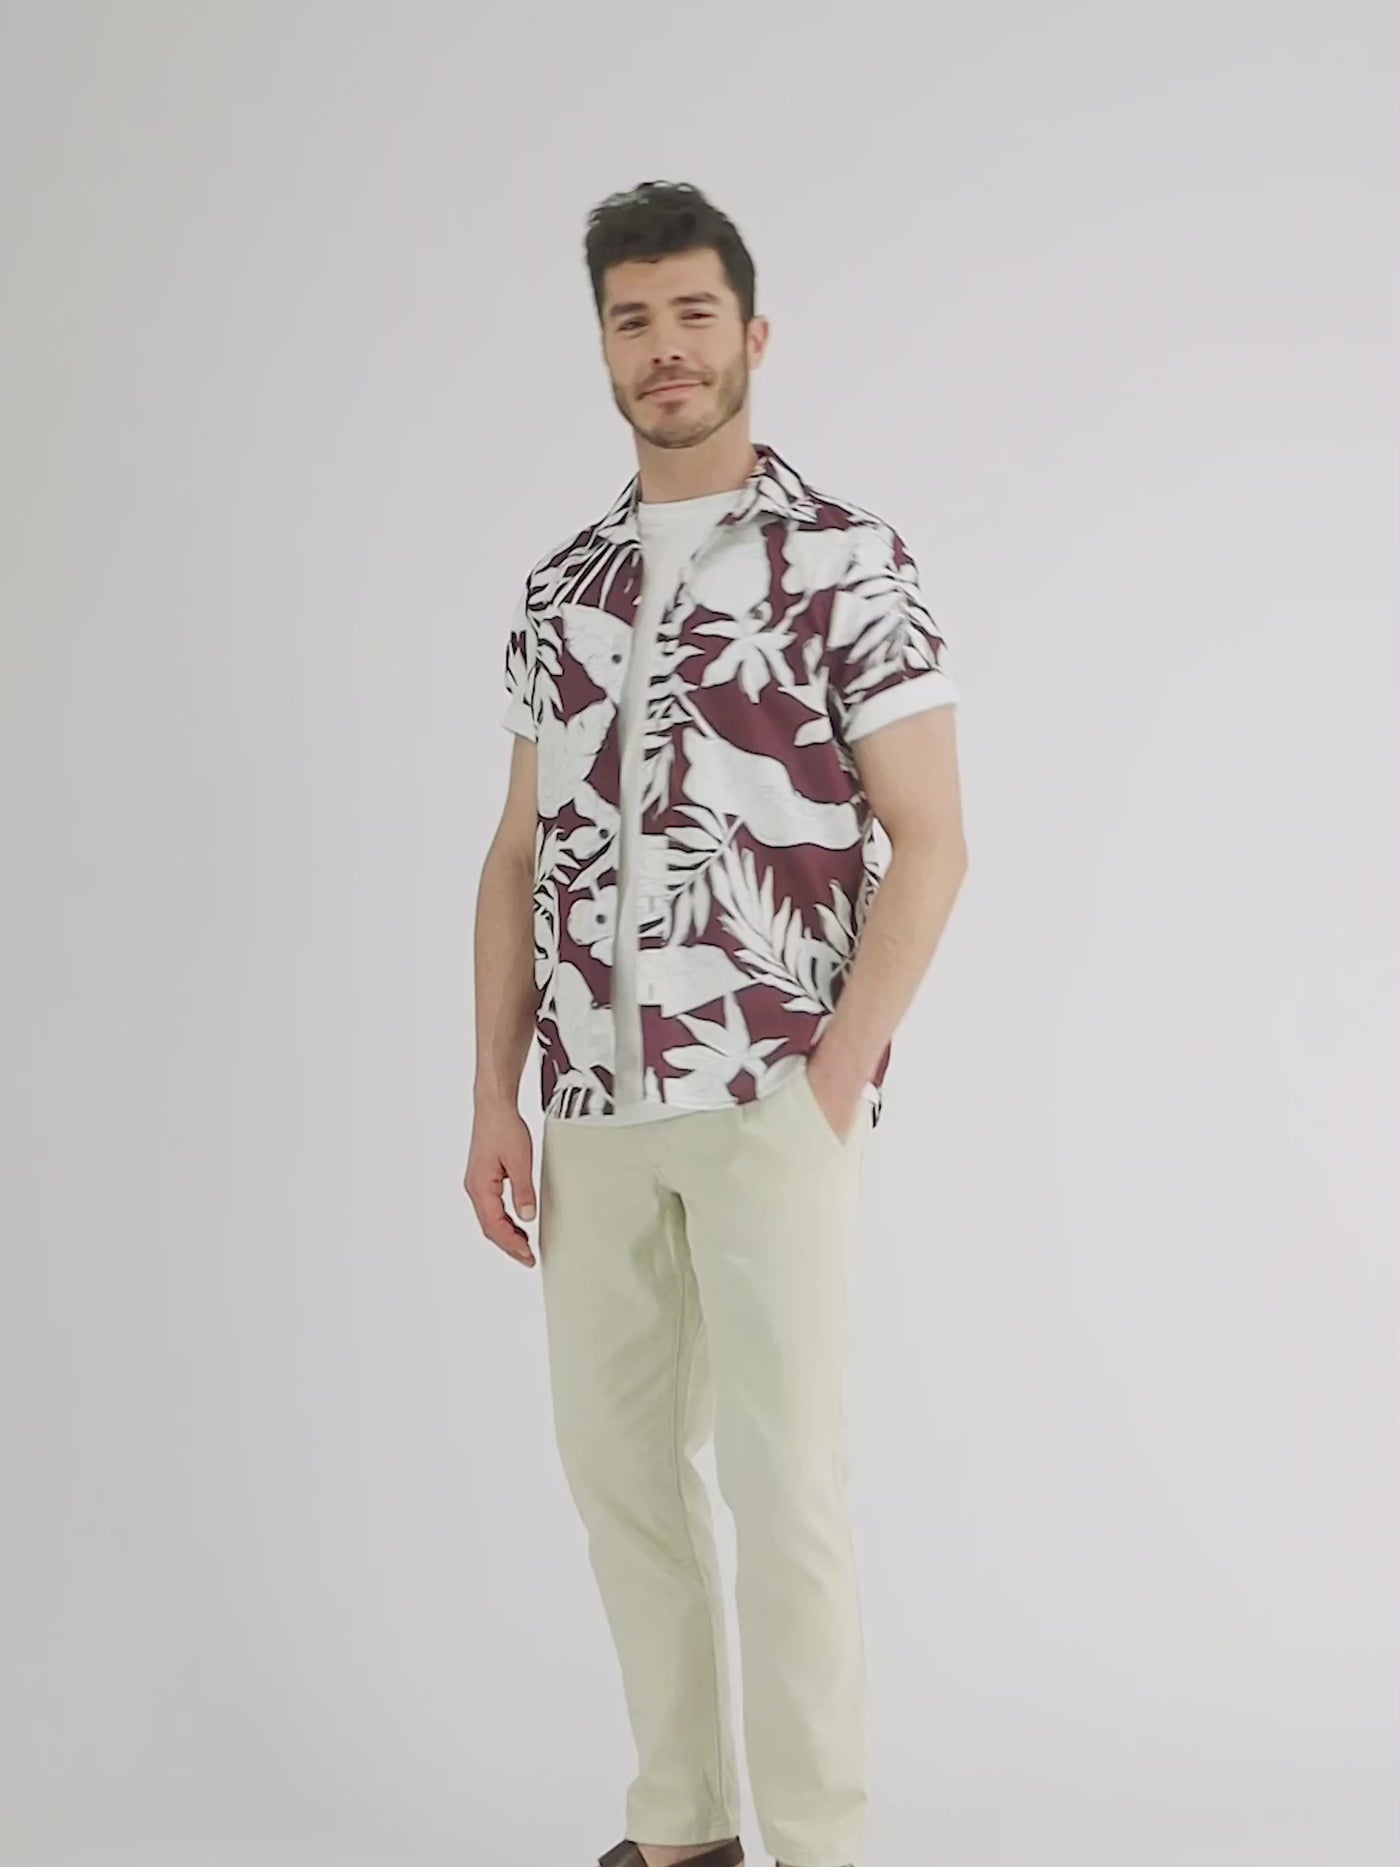 Short-sleeved shirt with a floral print